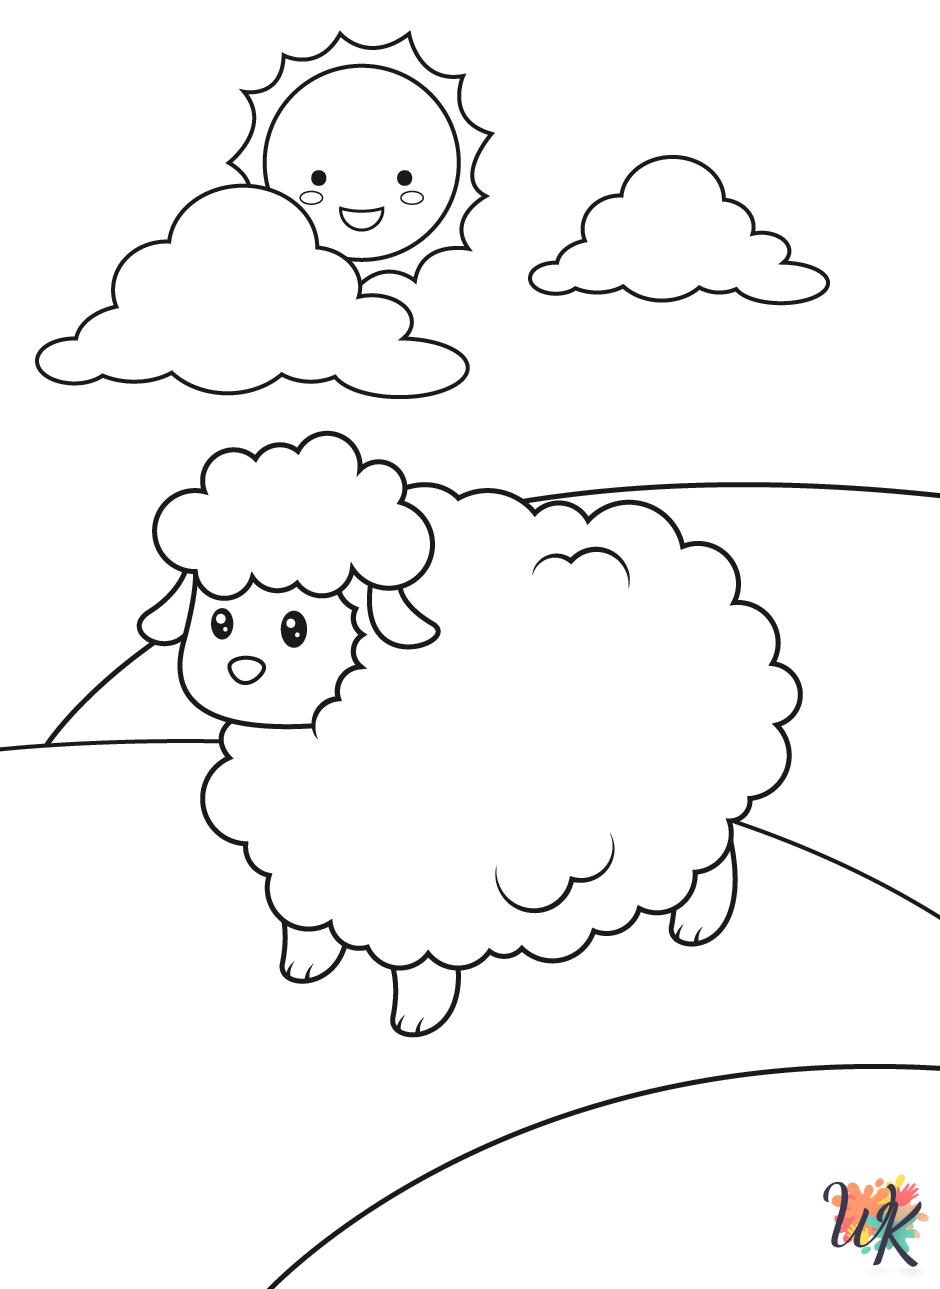 Sheep coloring pages printable free